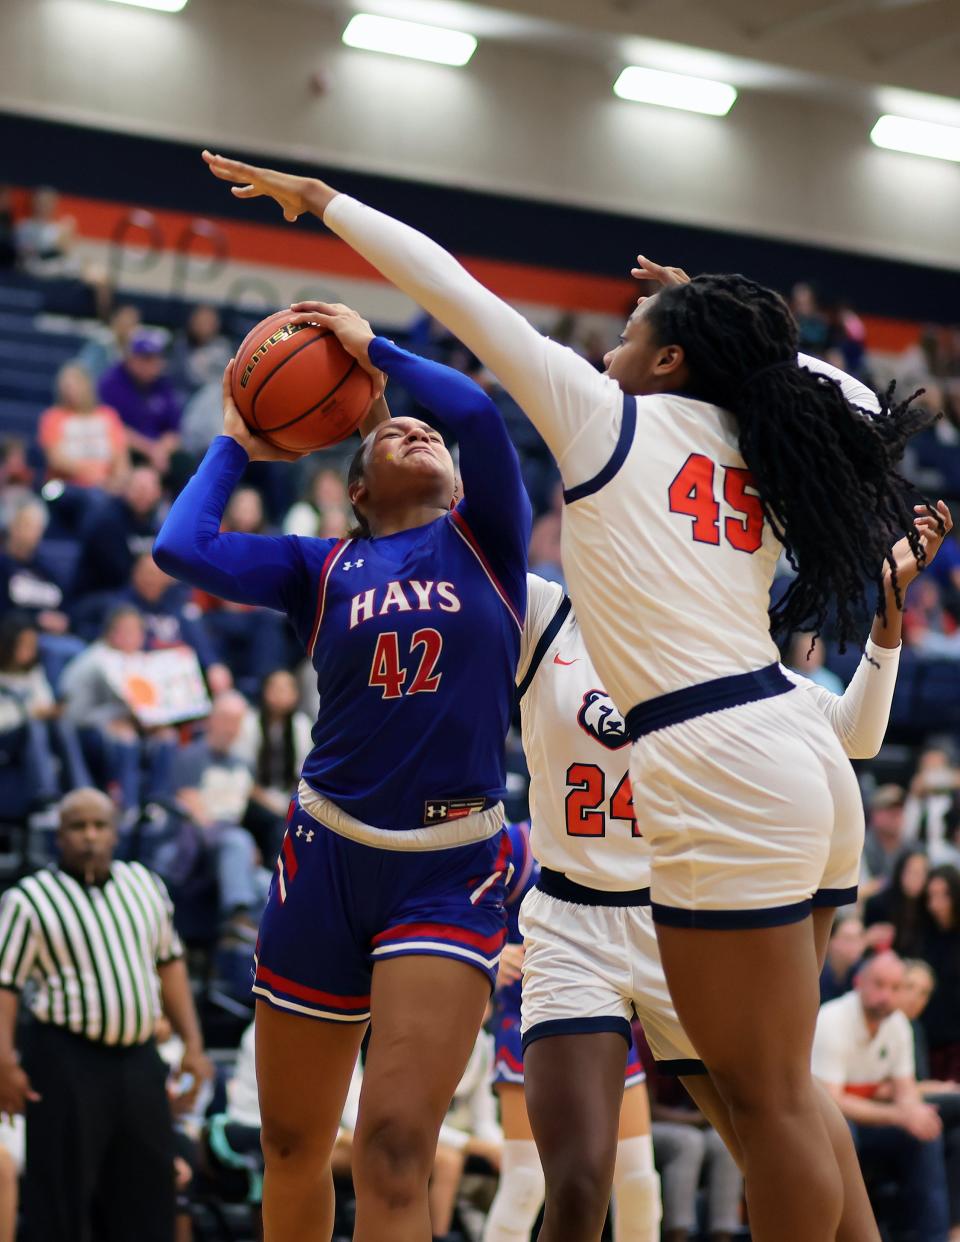 Hays' Madi Disu fights through a foul on her way to scoring during the Hawks' 65-32 win over Glenn on Tuesday night. "This was a statement win for our team," Hays coach Danny Preuss said. Hays improved to 10-0 in District 25-5A.